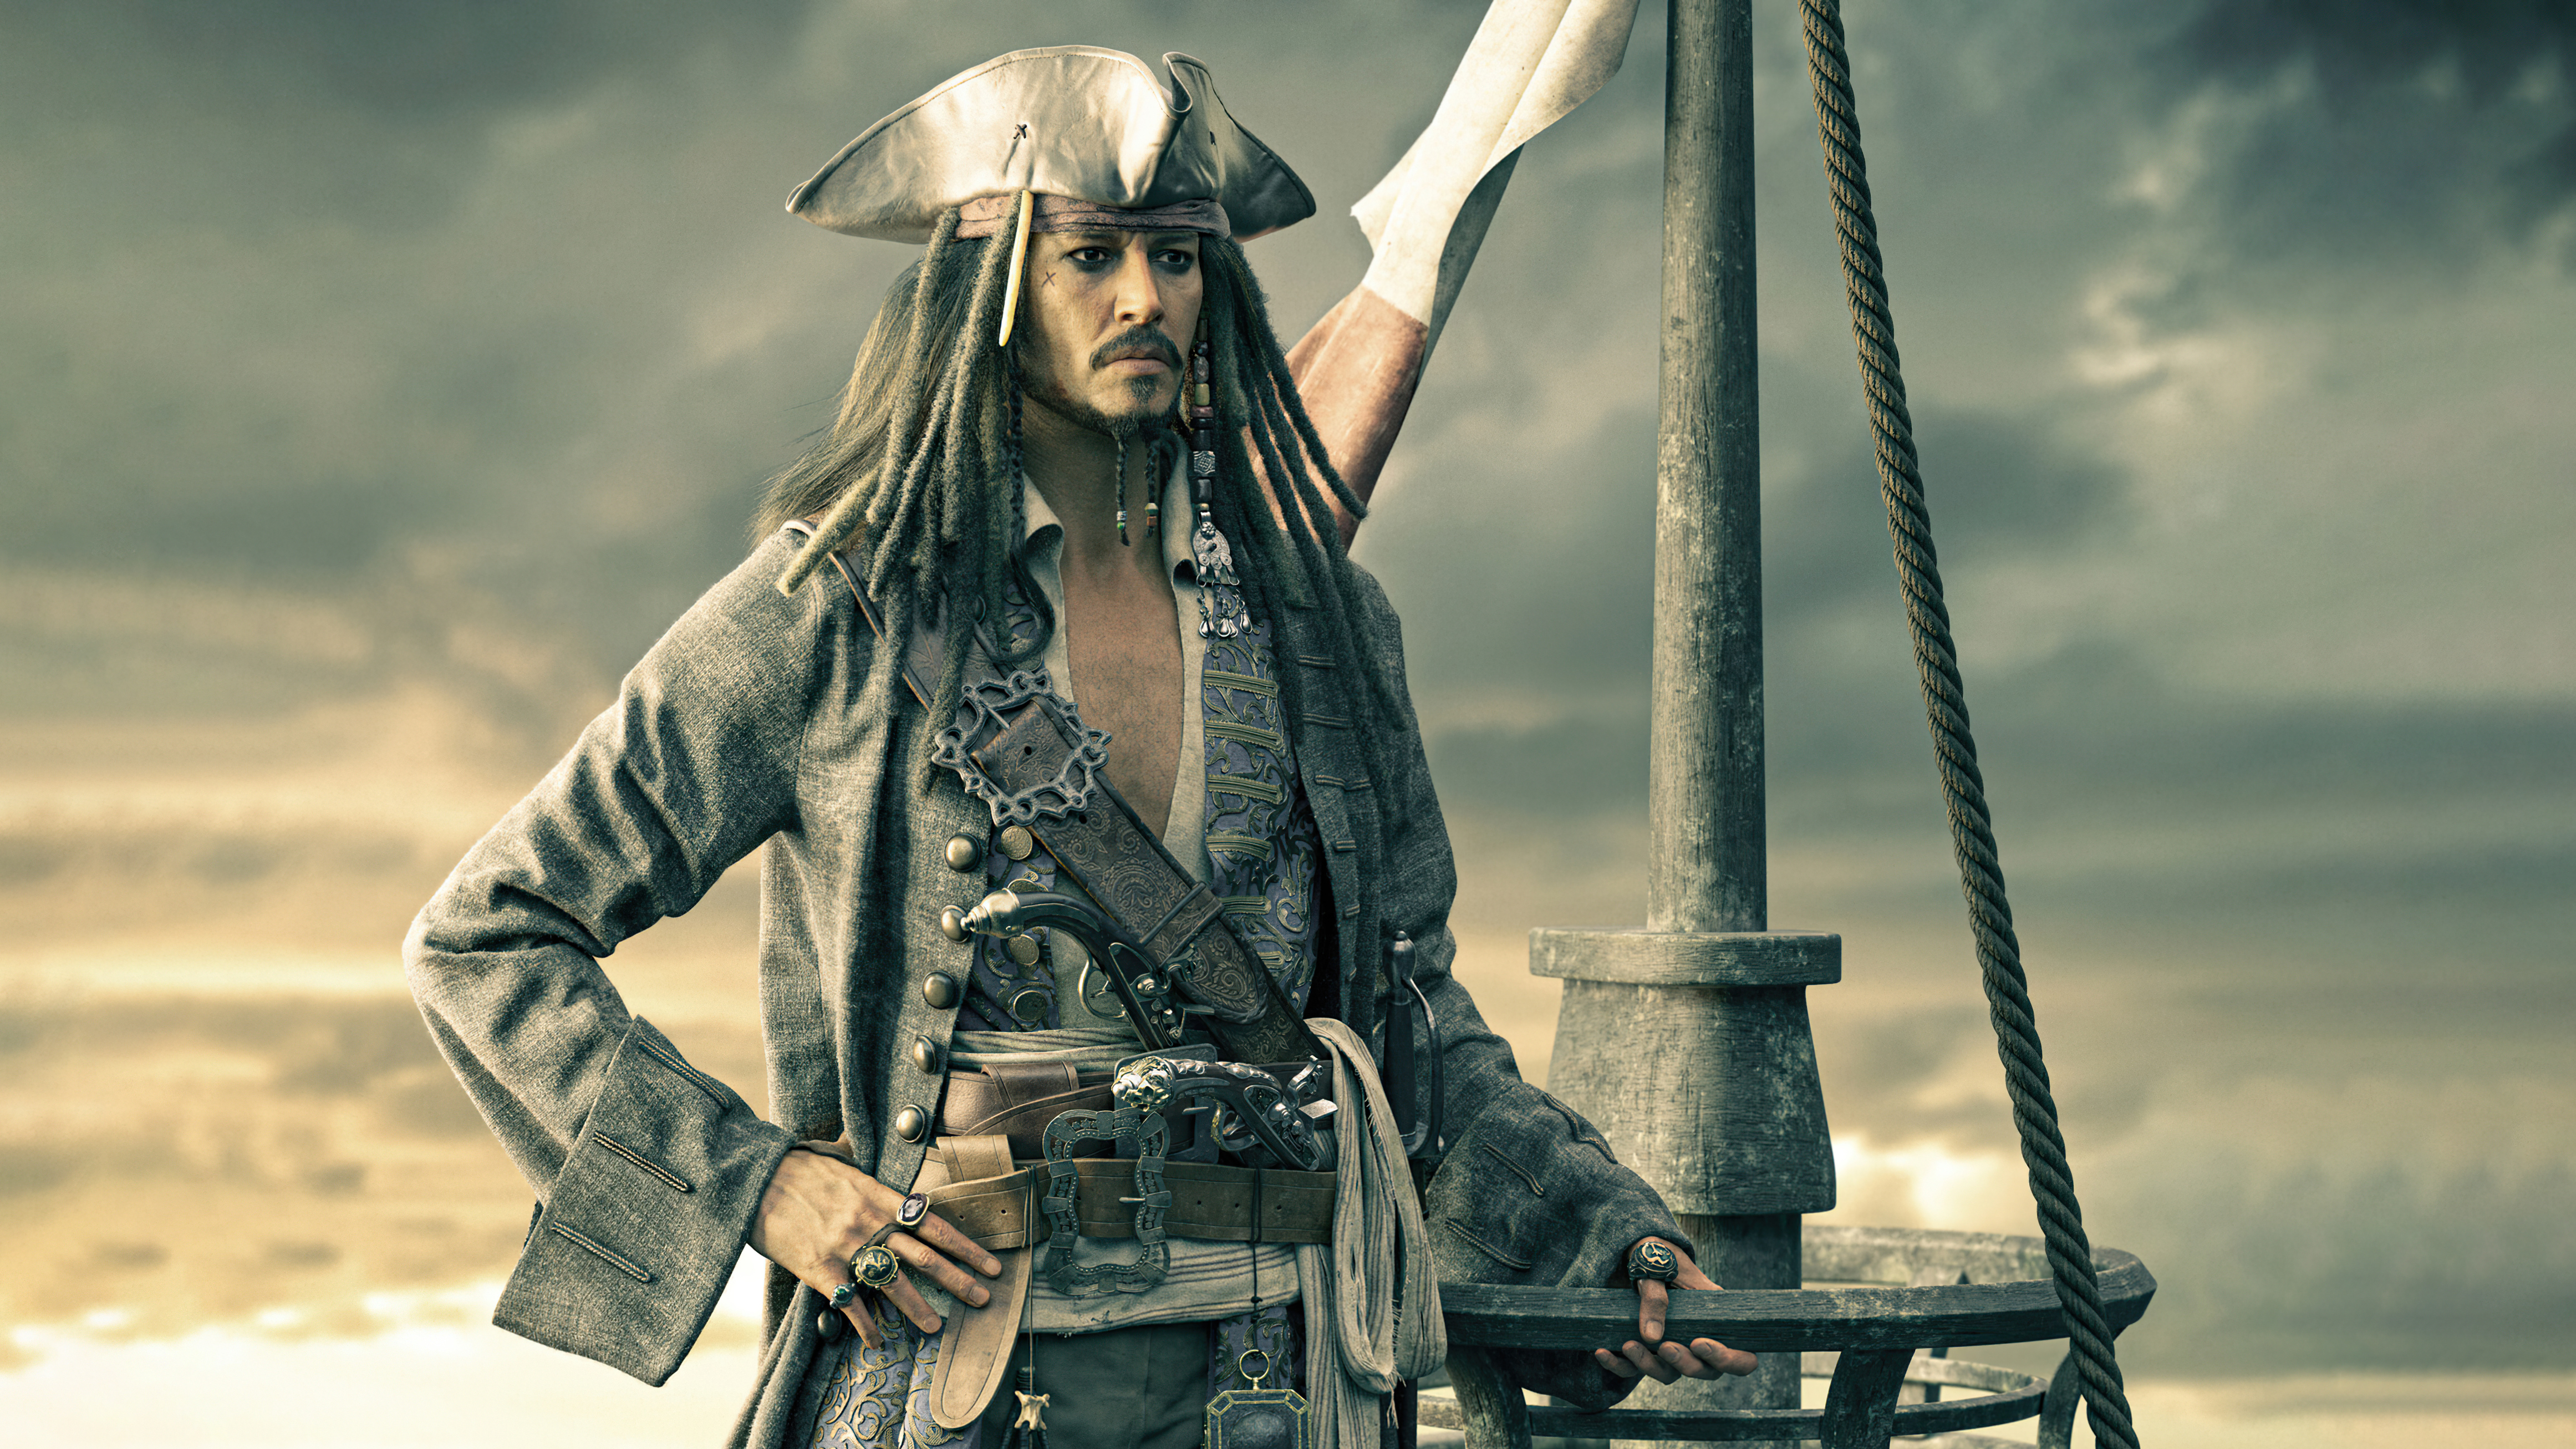 Jack Sparrow  Pirates Of The Caribbean Wallpaper  TV  Movies HD  Wallpapers  HDwallpapersnet